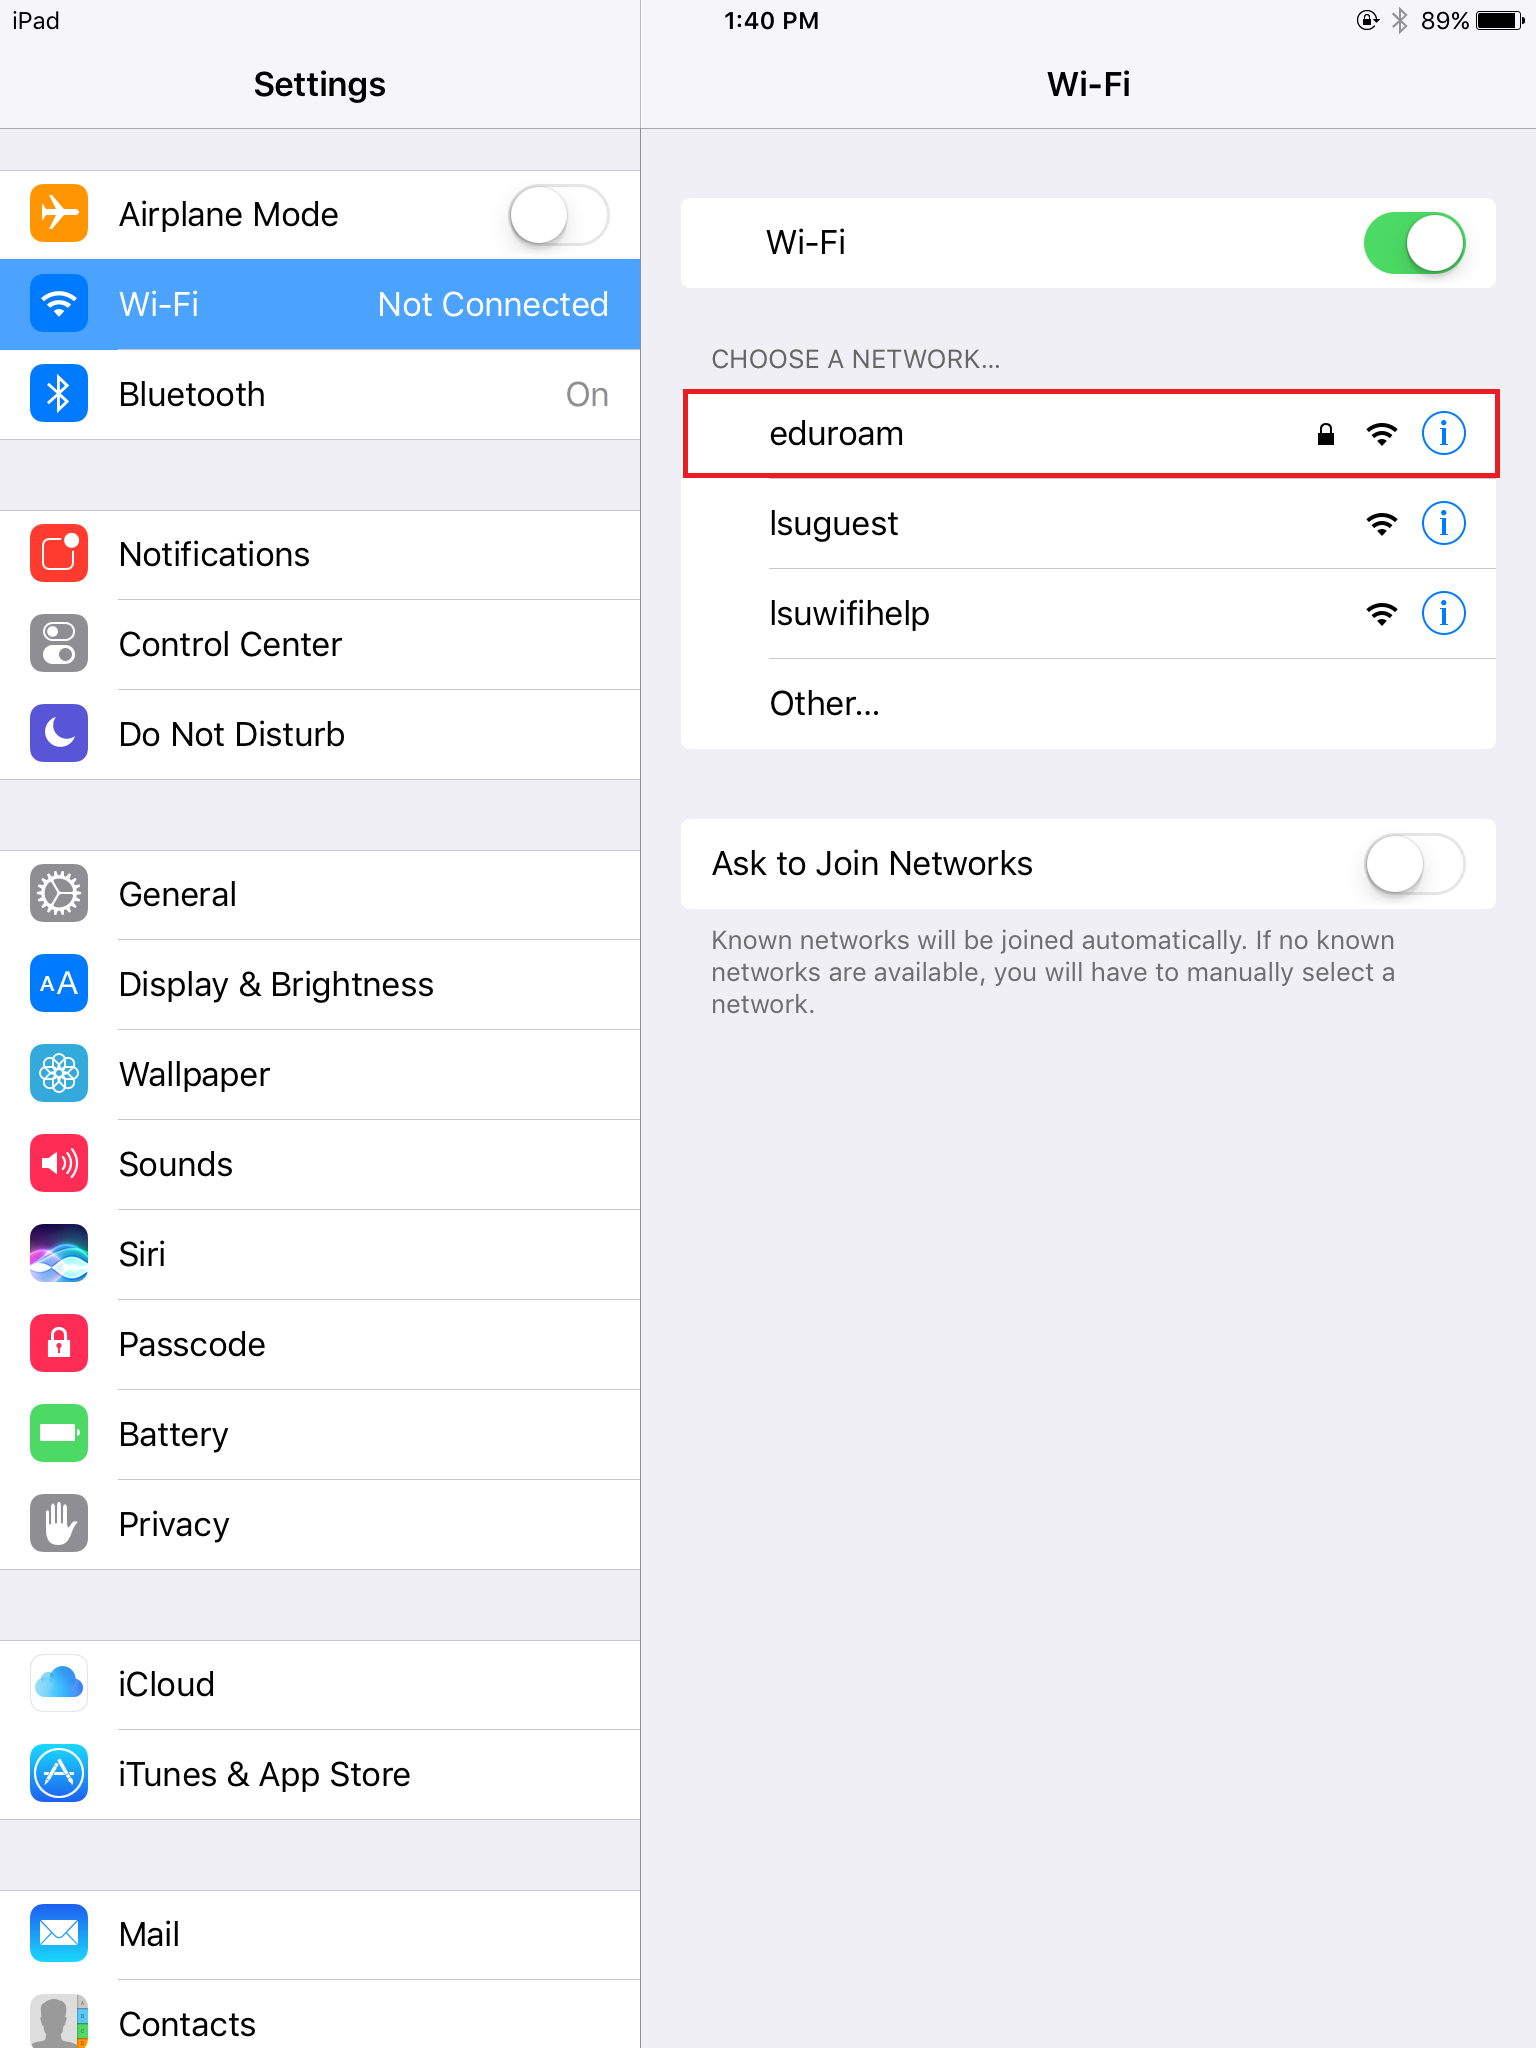 iPad Wifi Settings with eduroam highlighted at the right of the screen.